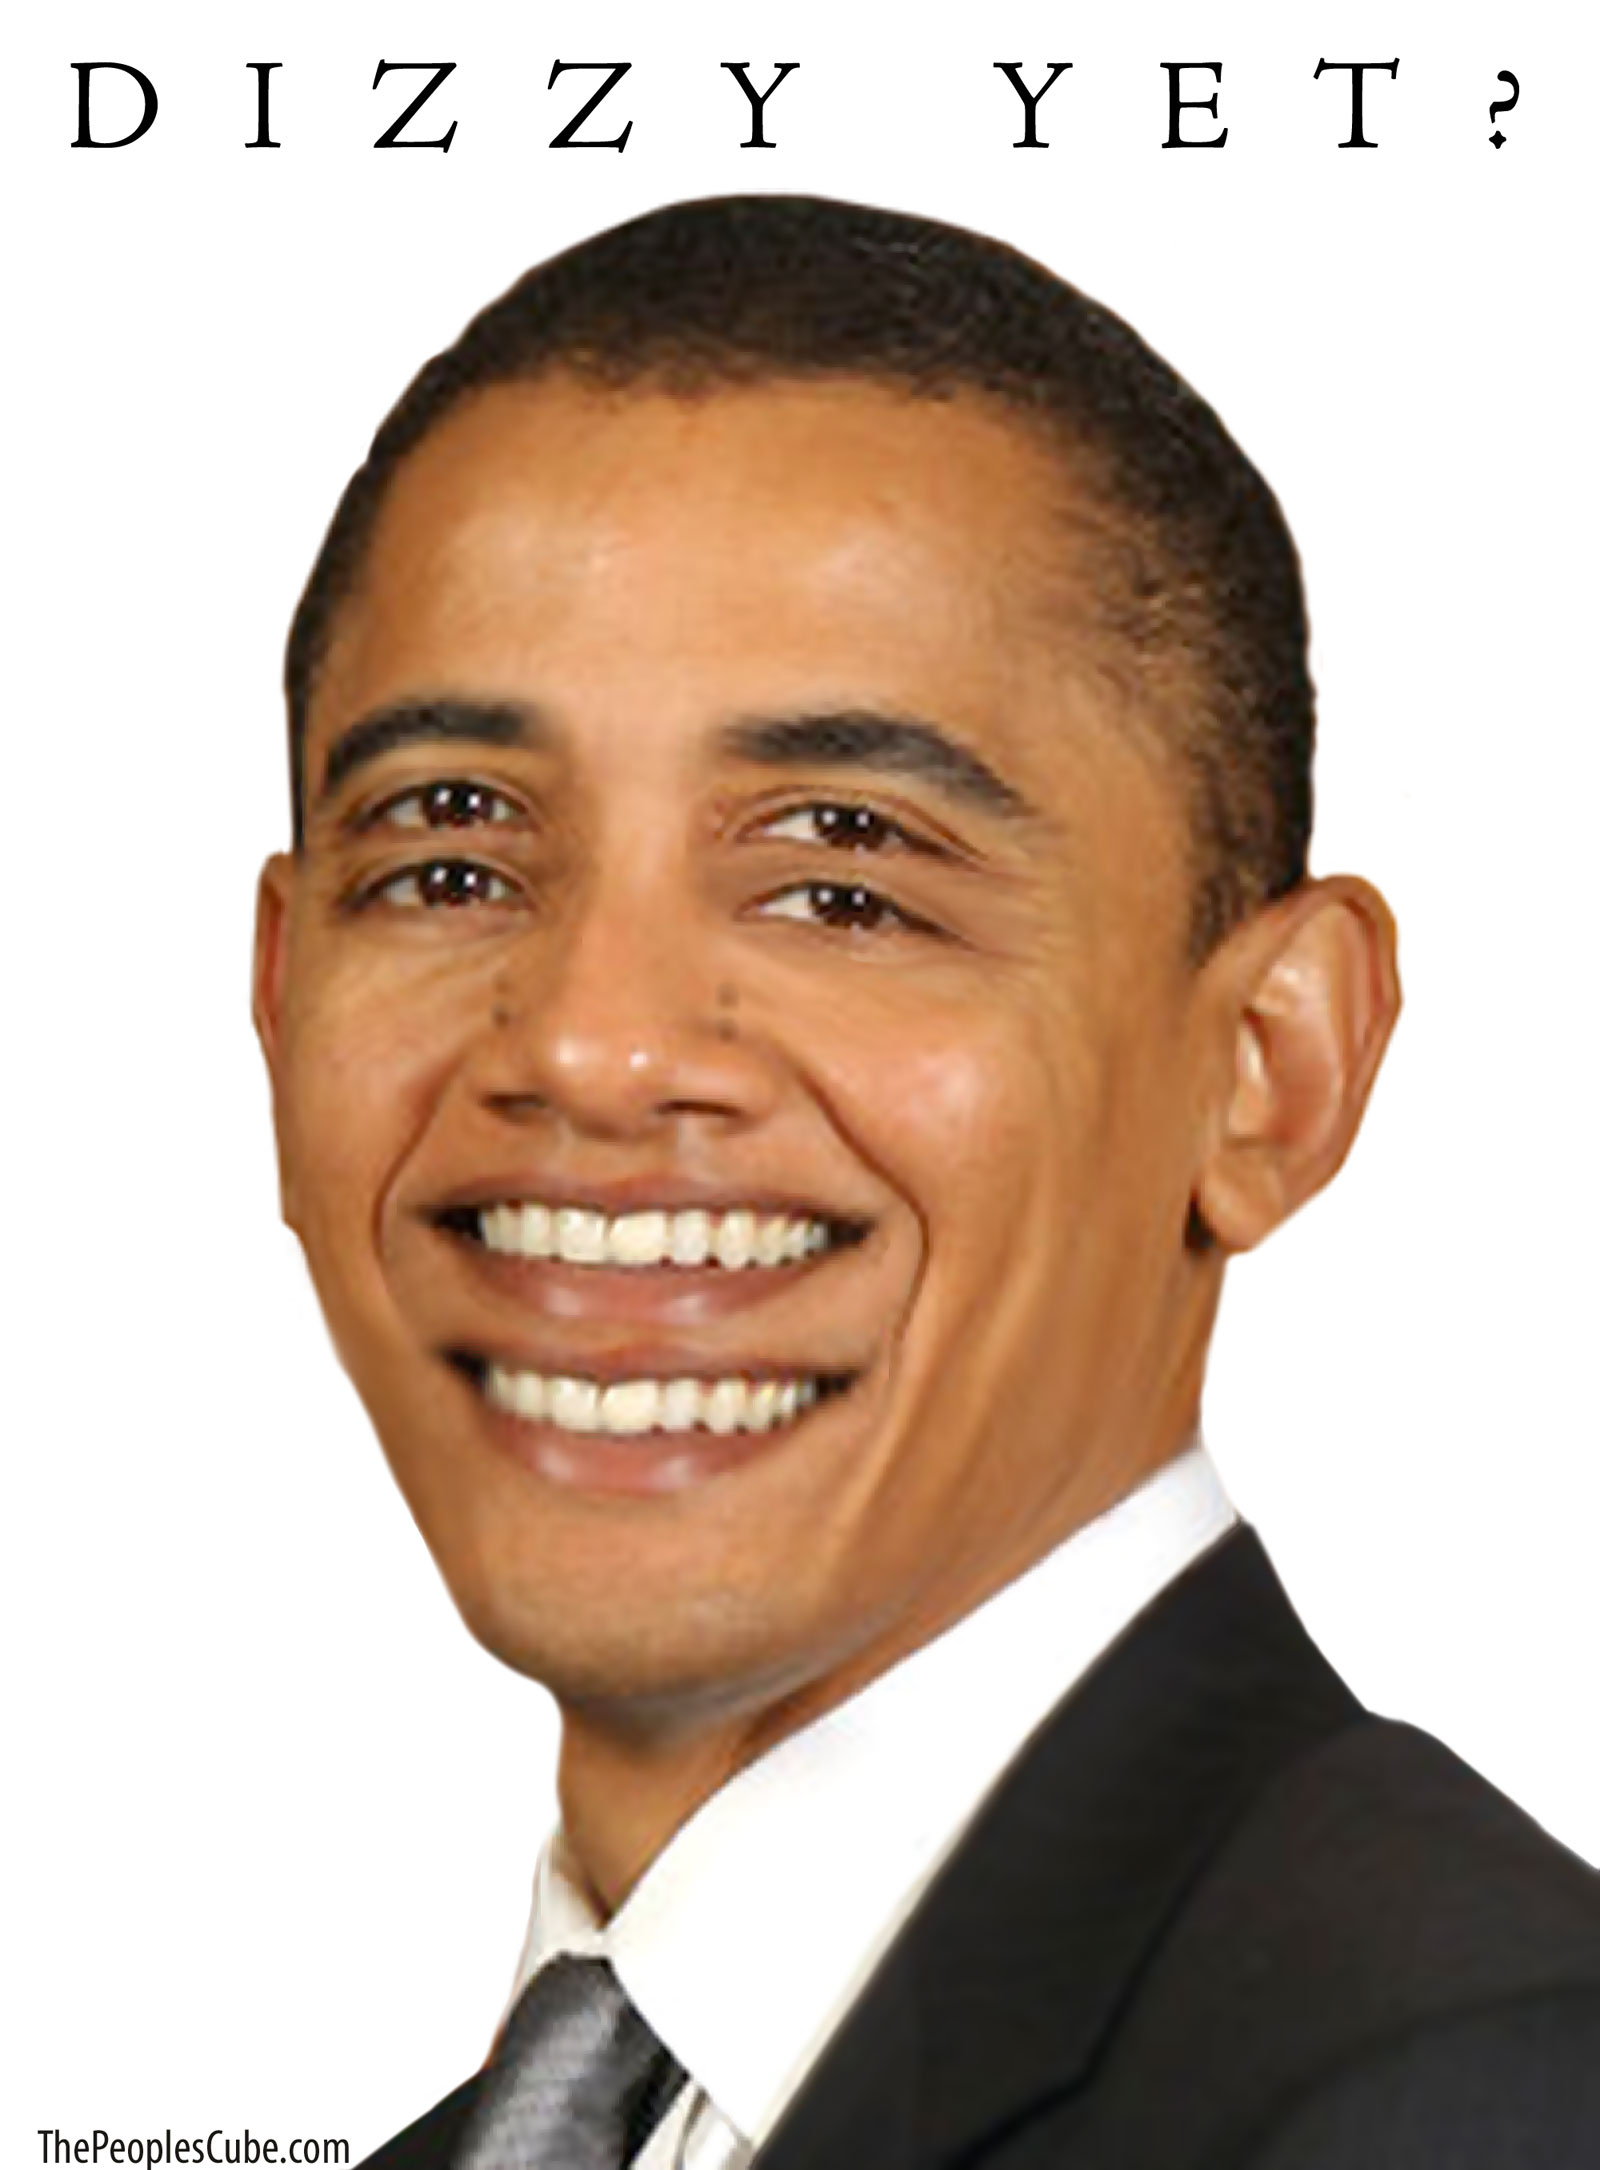 http://thepeoplescube.com/images/TeaParties/Obama_Dizzy_Double_Large.jpg